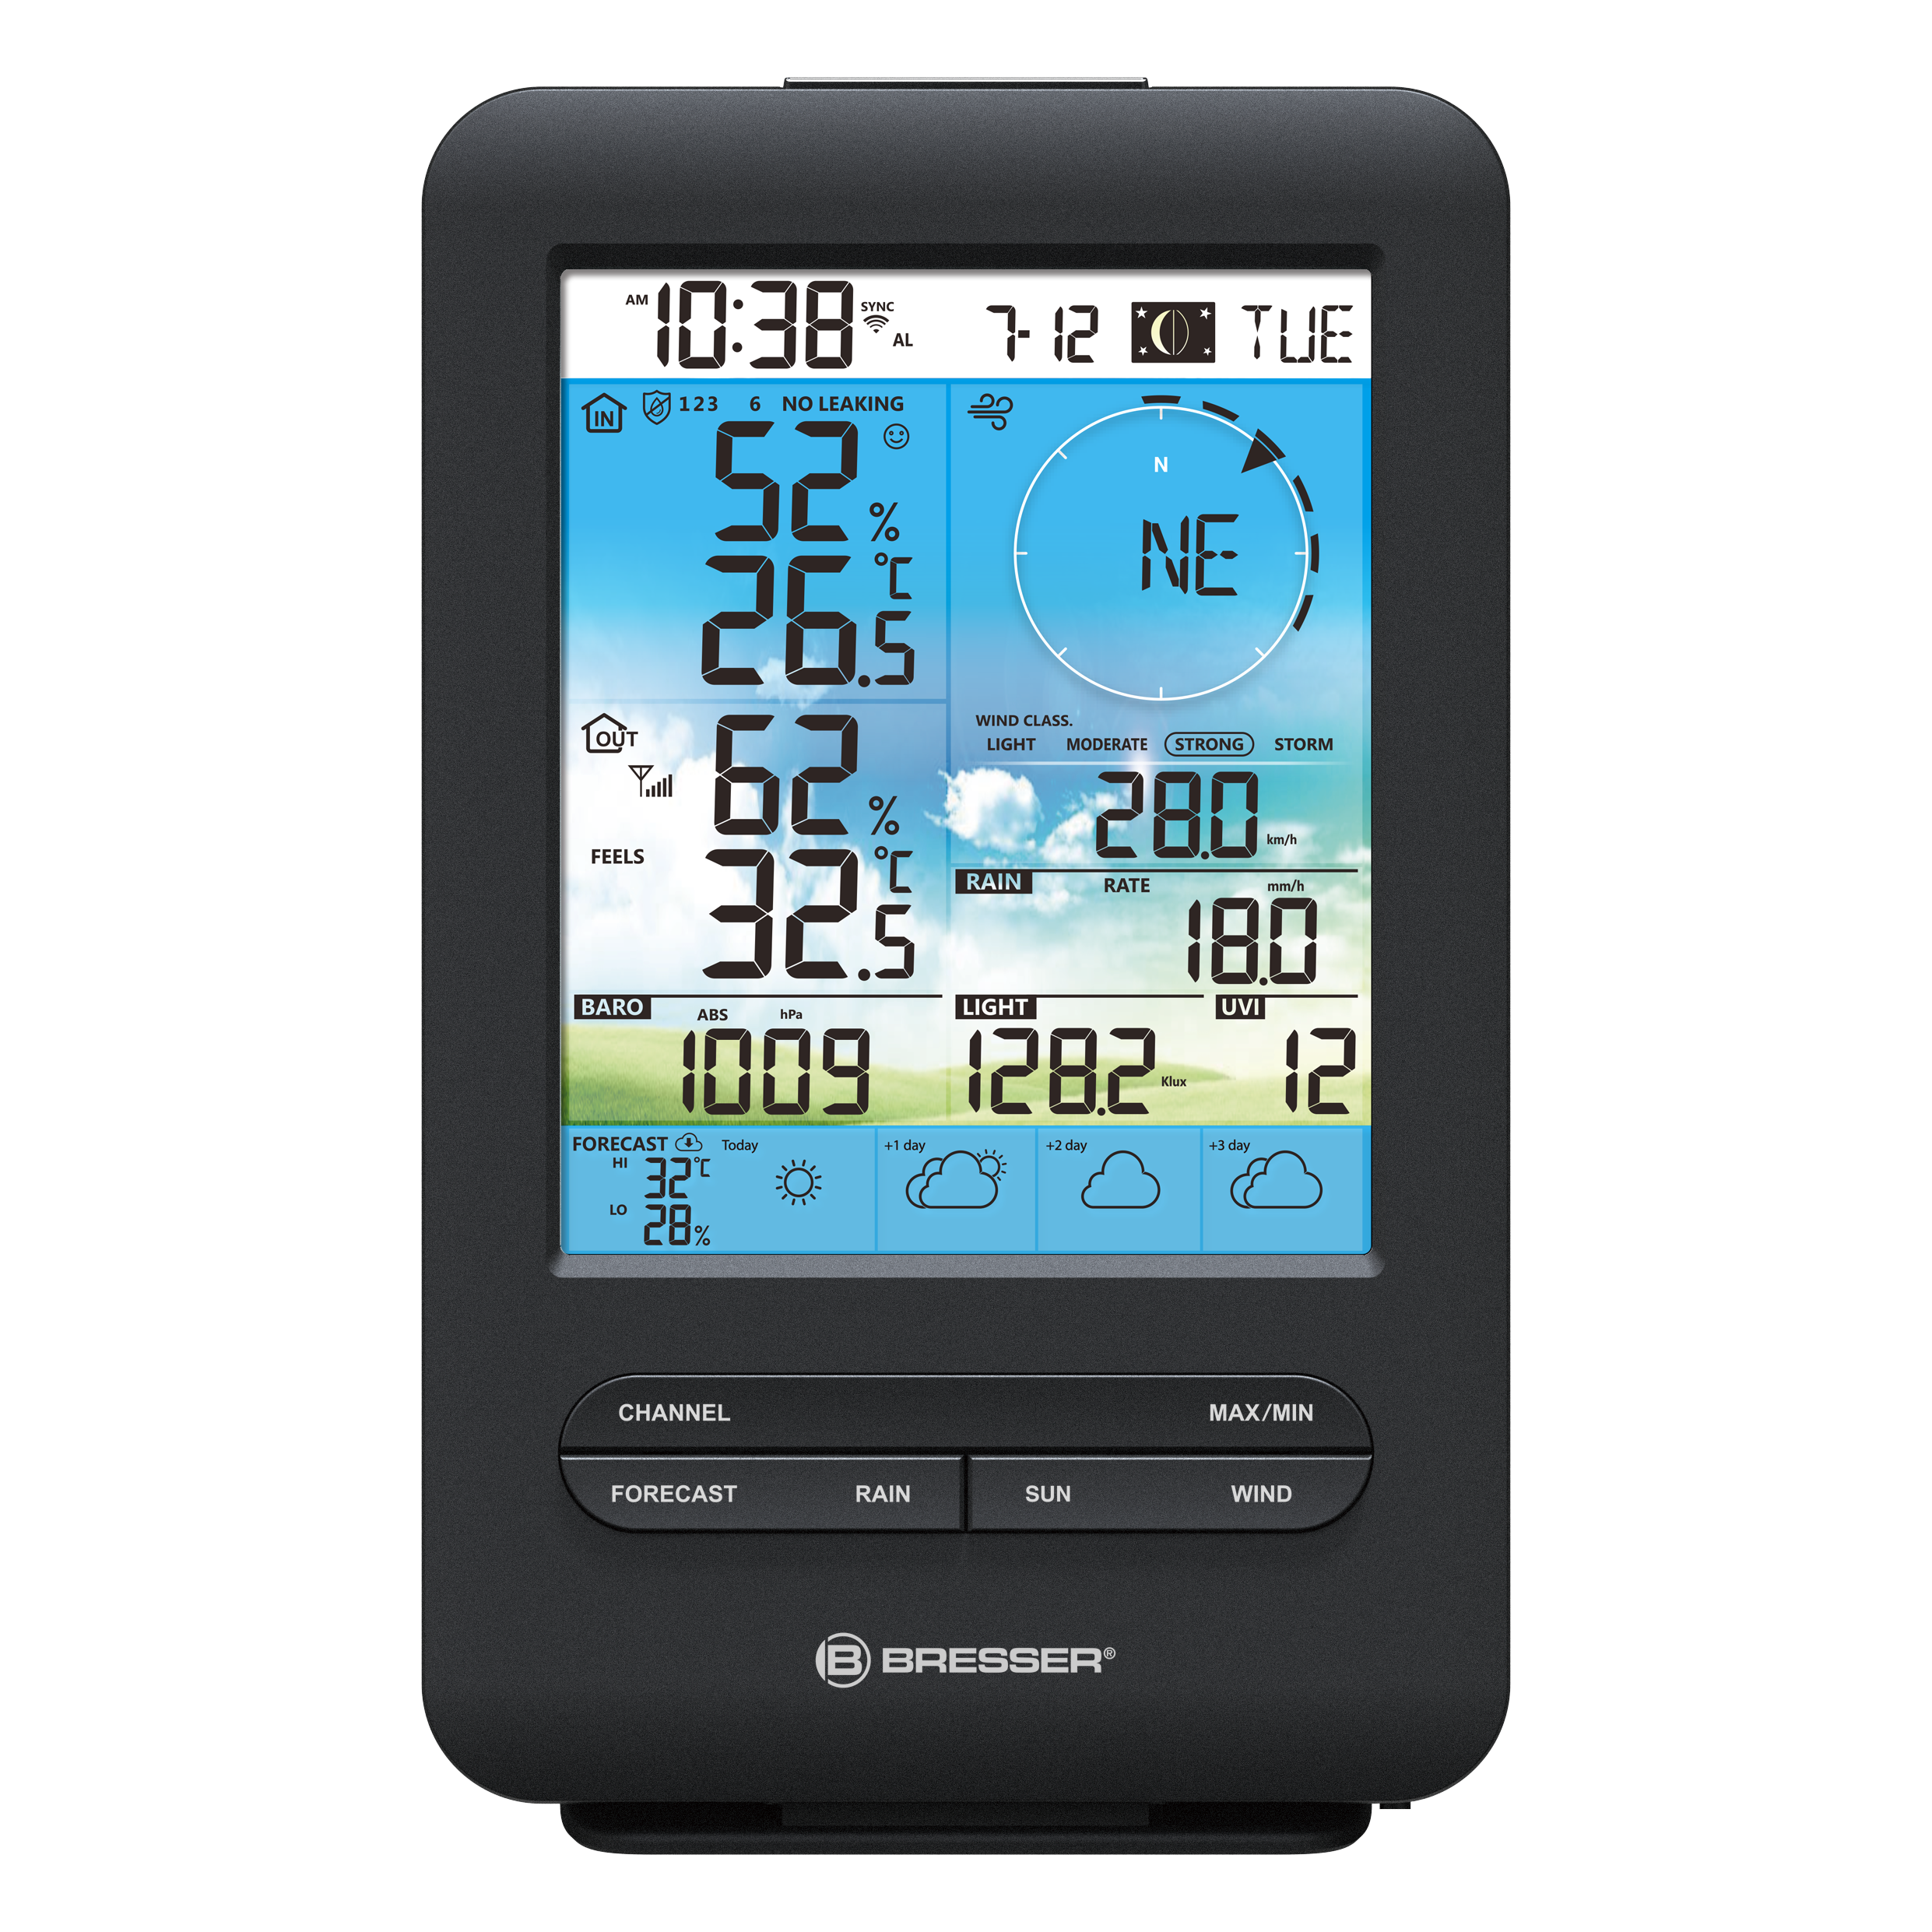 BRESSER additional base station for the 7003200 4-day 4CAST Wi-Fi weather centre (Refurbished)